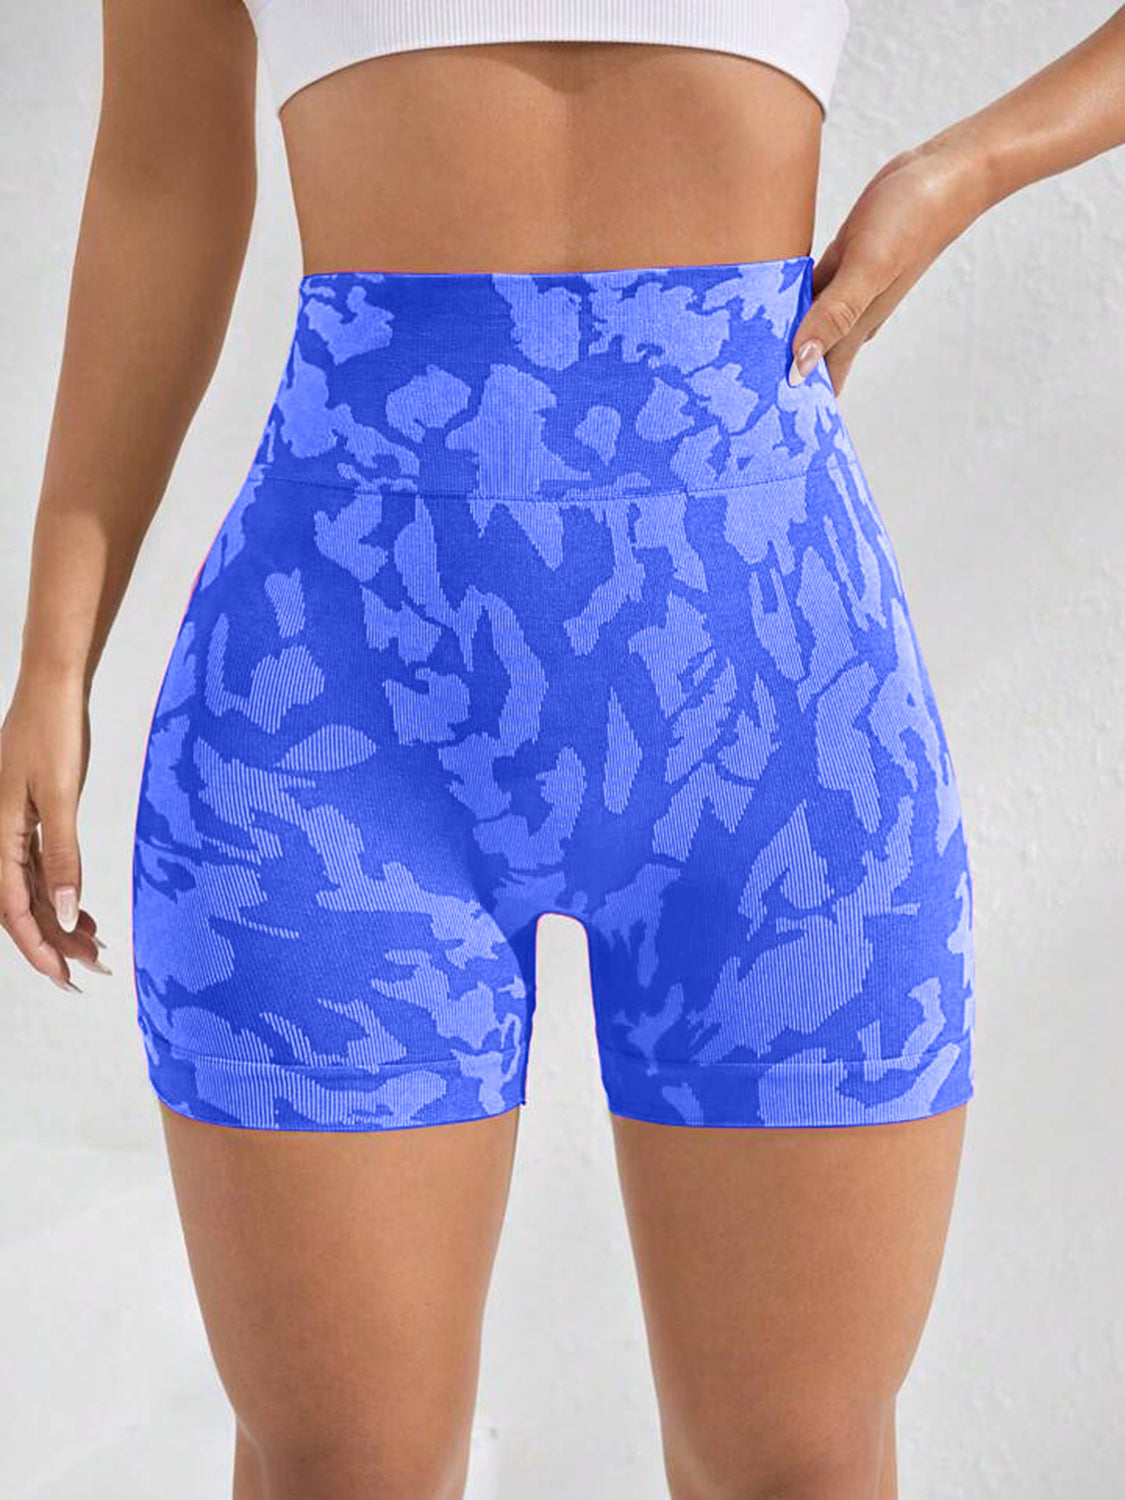 Get After It Printed High Waist Active Shorts (Multiple Colors) - BP